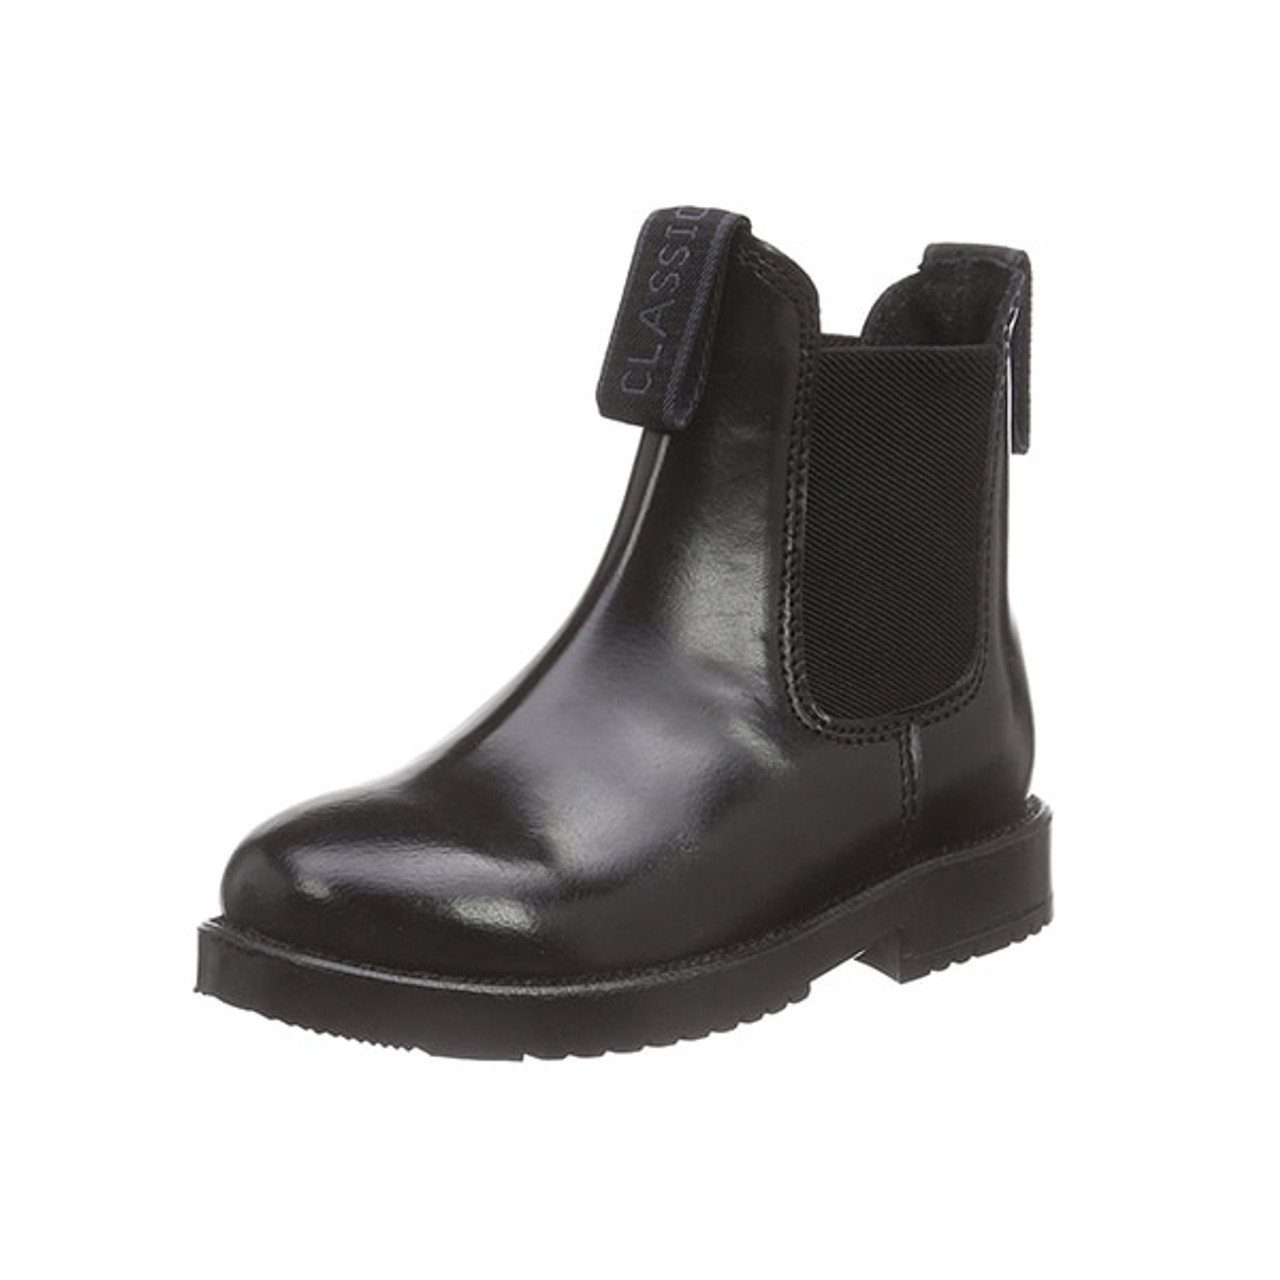 leather riding boots sale clearance